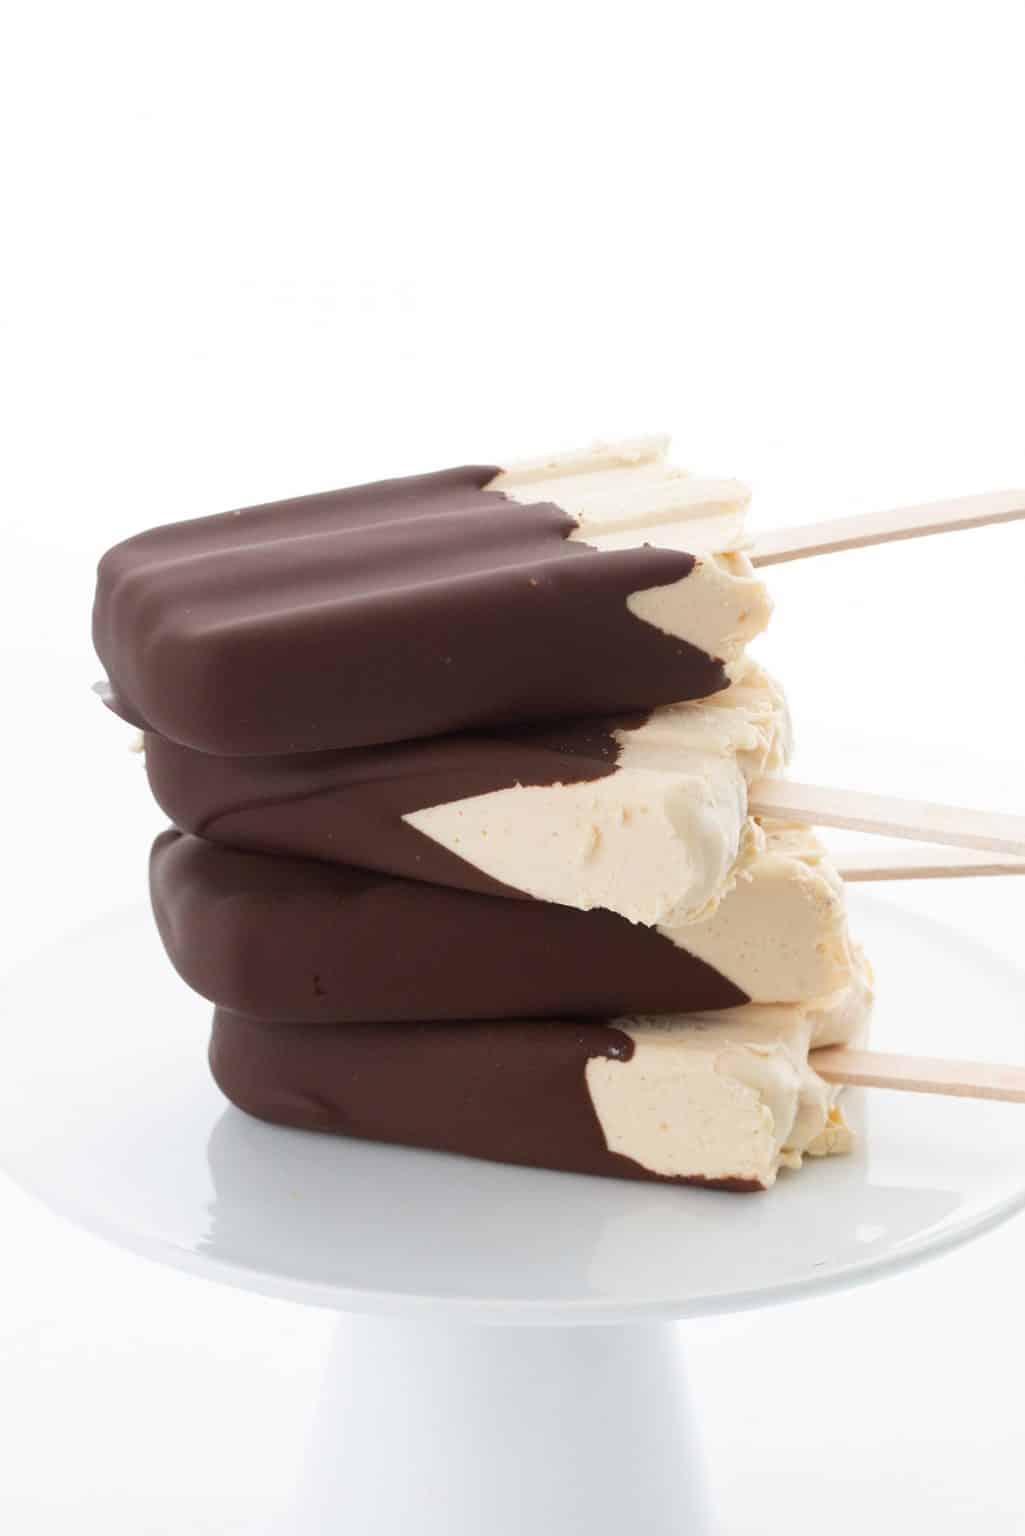 Keto Chocolate Peanut Butter Popsicles - All Day I Dream About Food